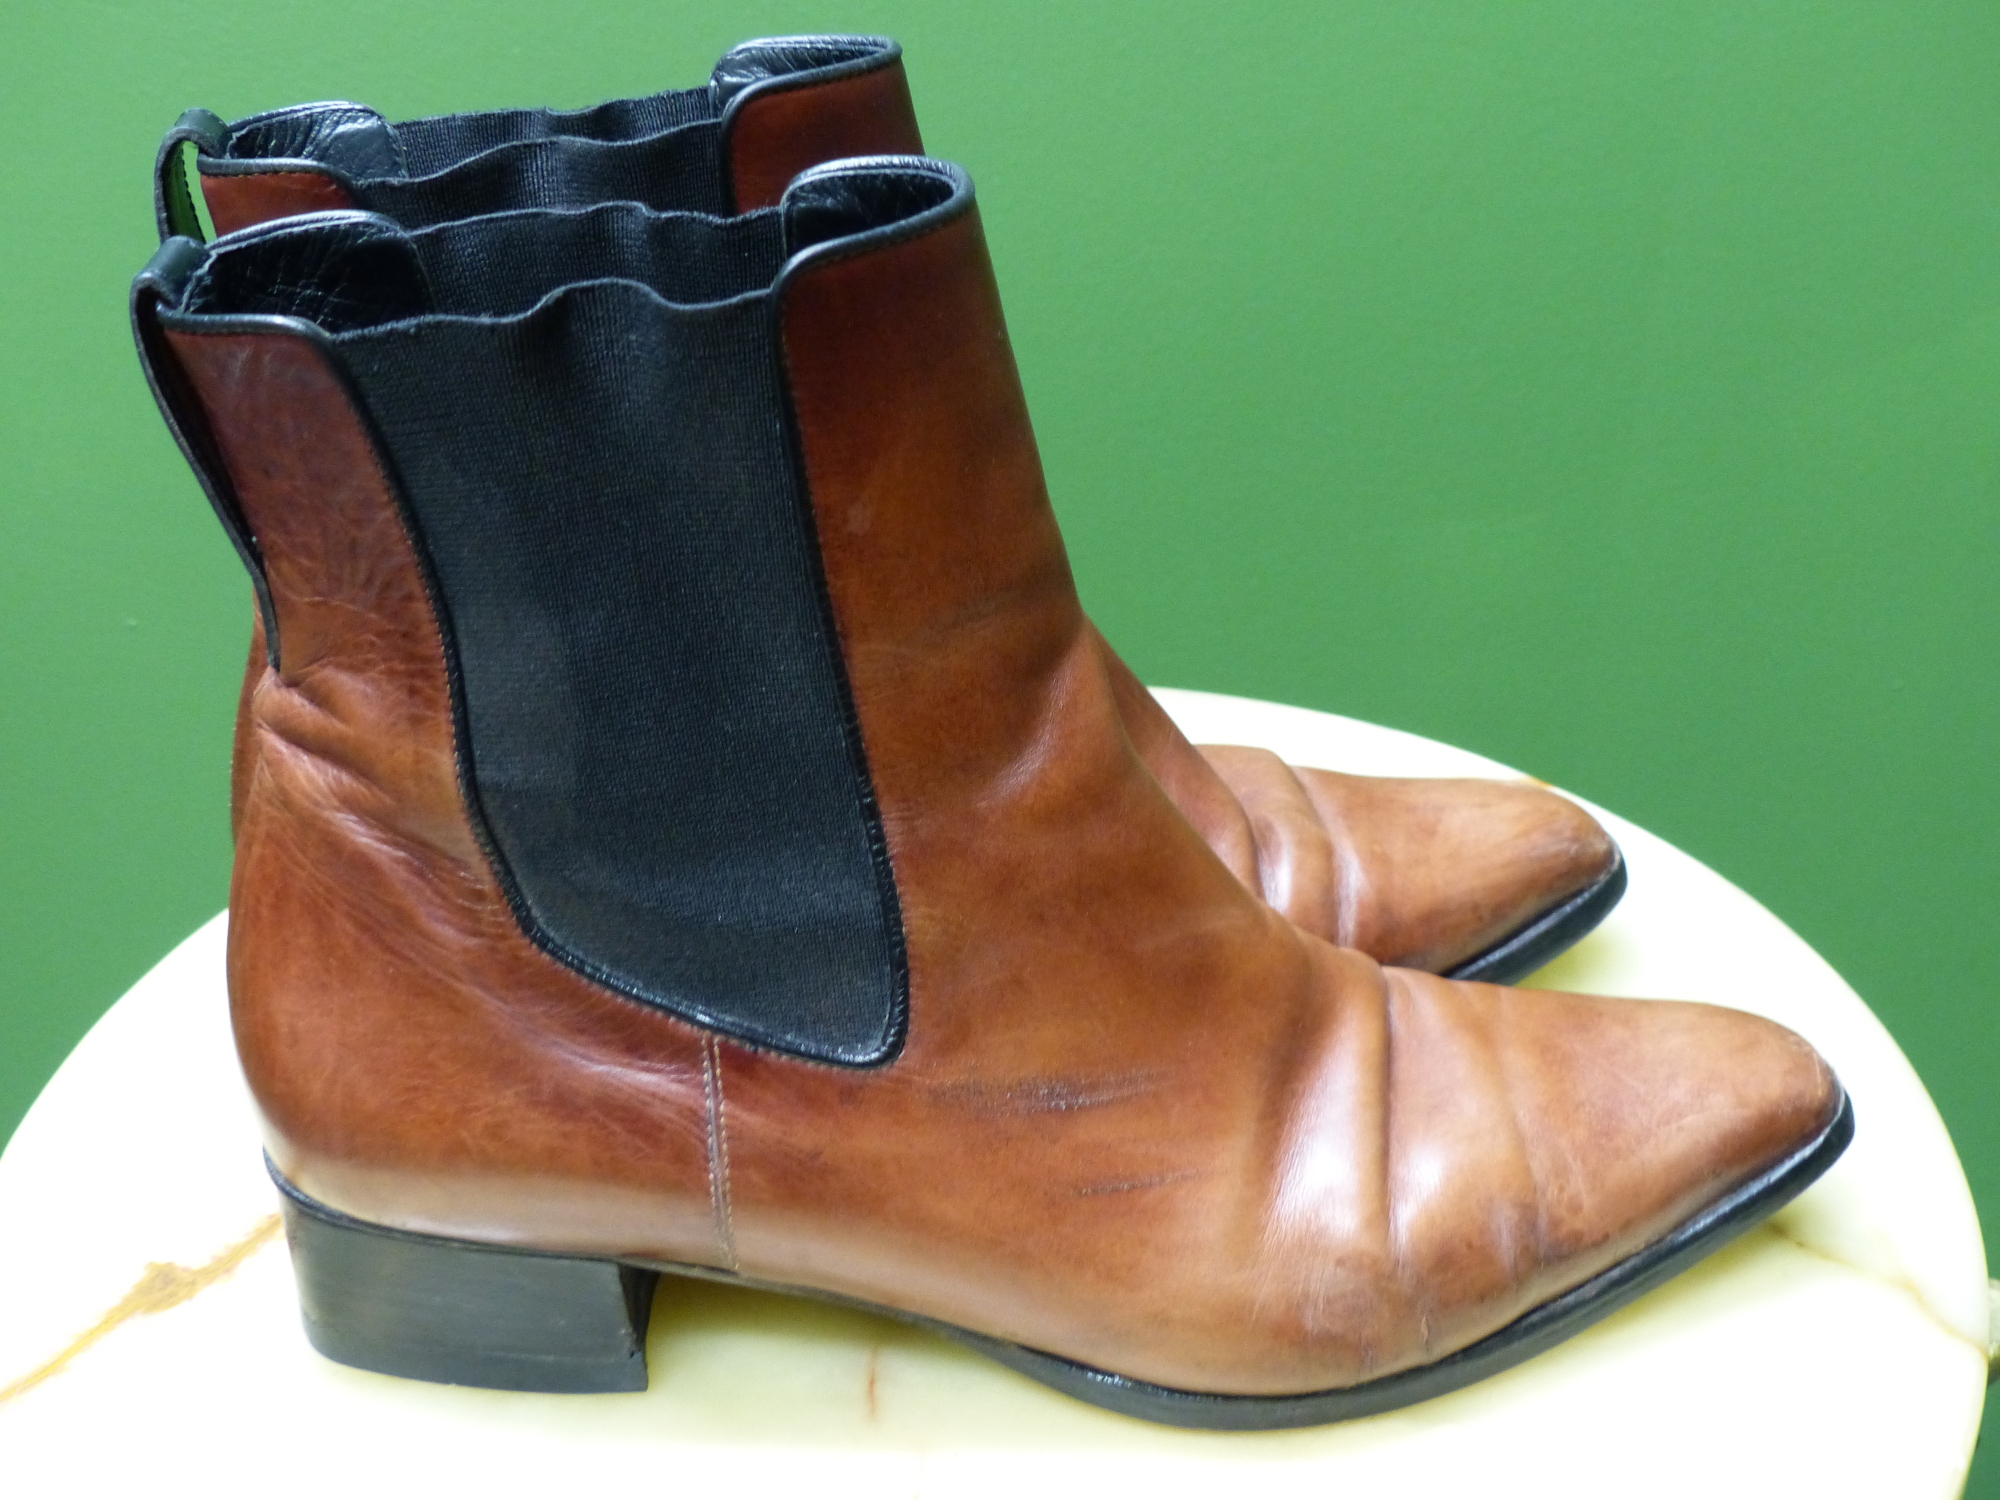 SHOES. LORENZO BANFI ITALY BLACK LEATHER COURT SHOES EUR SIZE 39.5. TOGETHER WITH BROWN BOOTS SIZE - Image 10 of 10